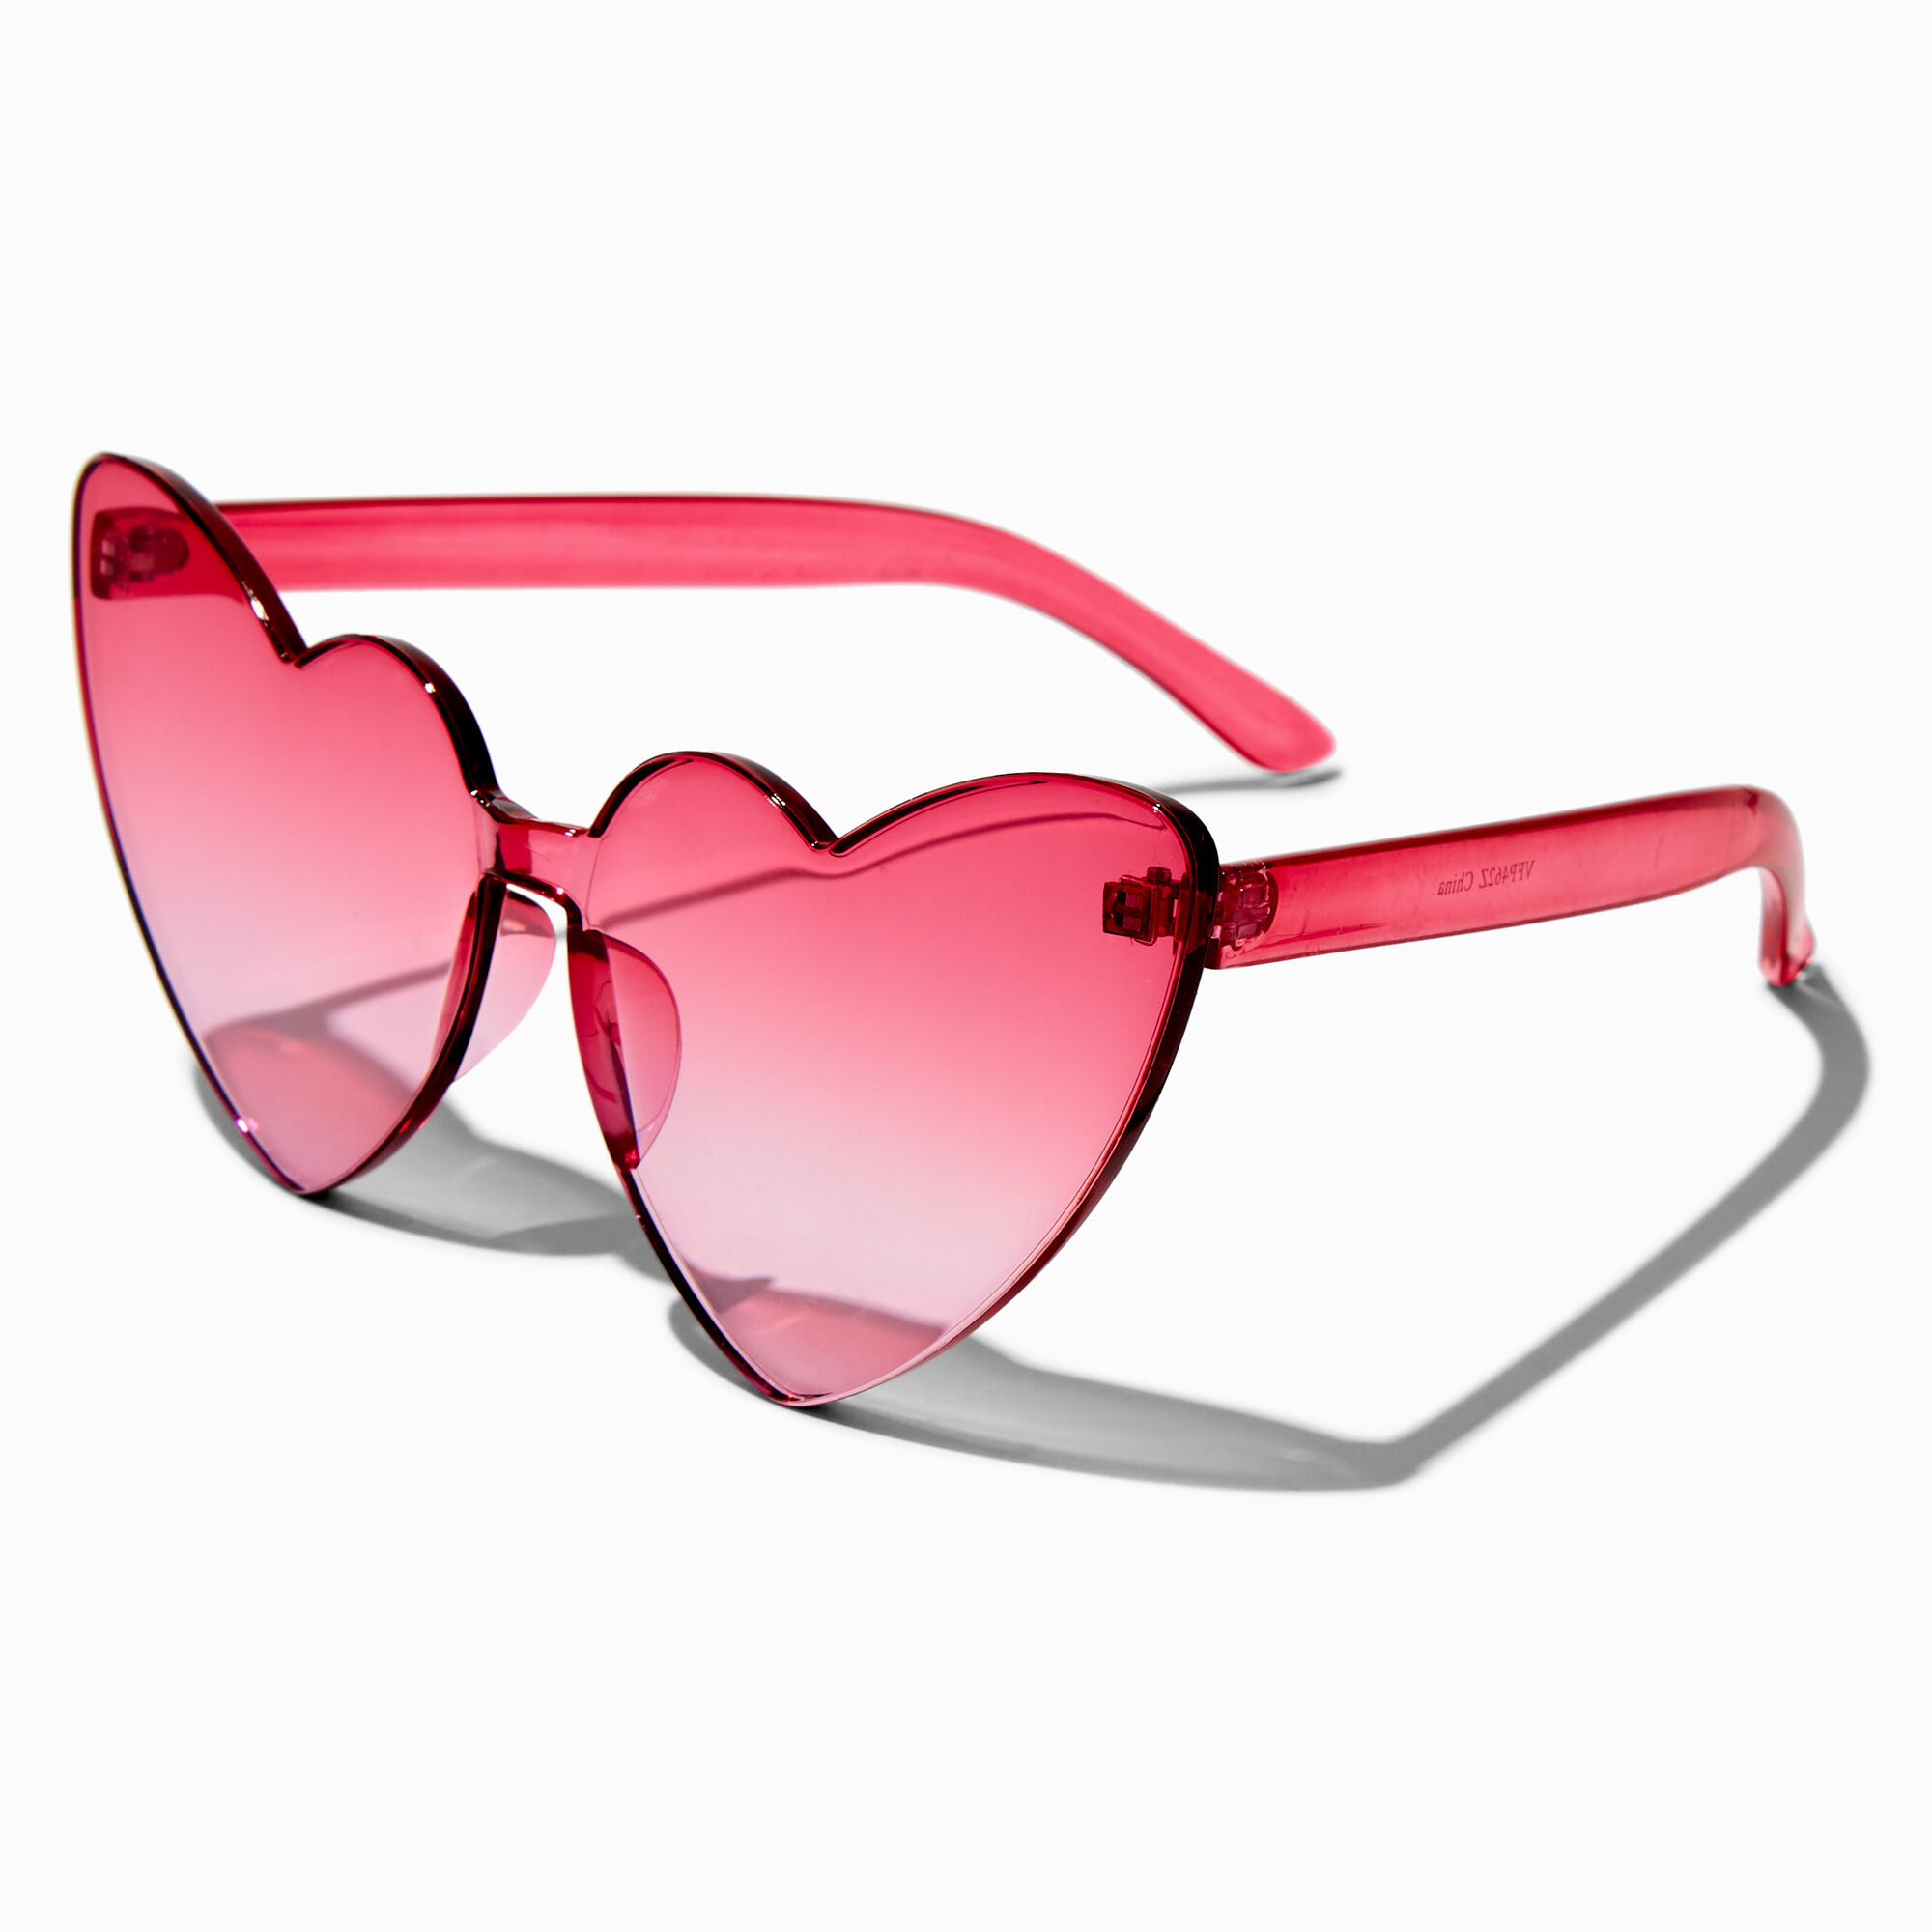 View Claires Bright Heart Shaped Rimless Sunglasses Pink information